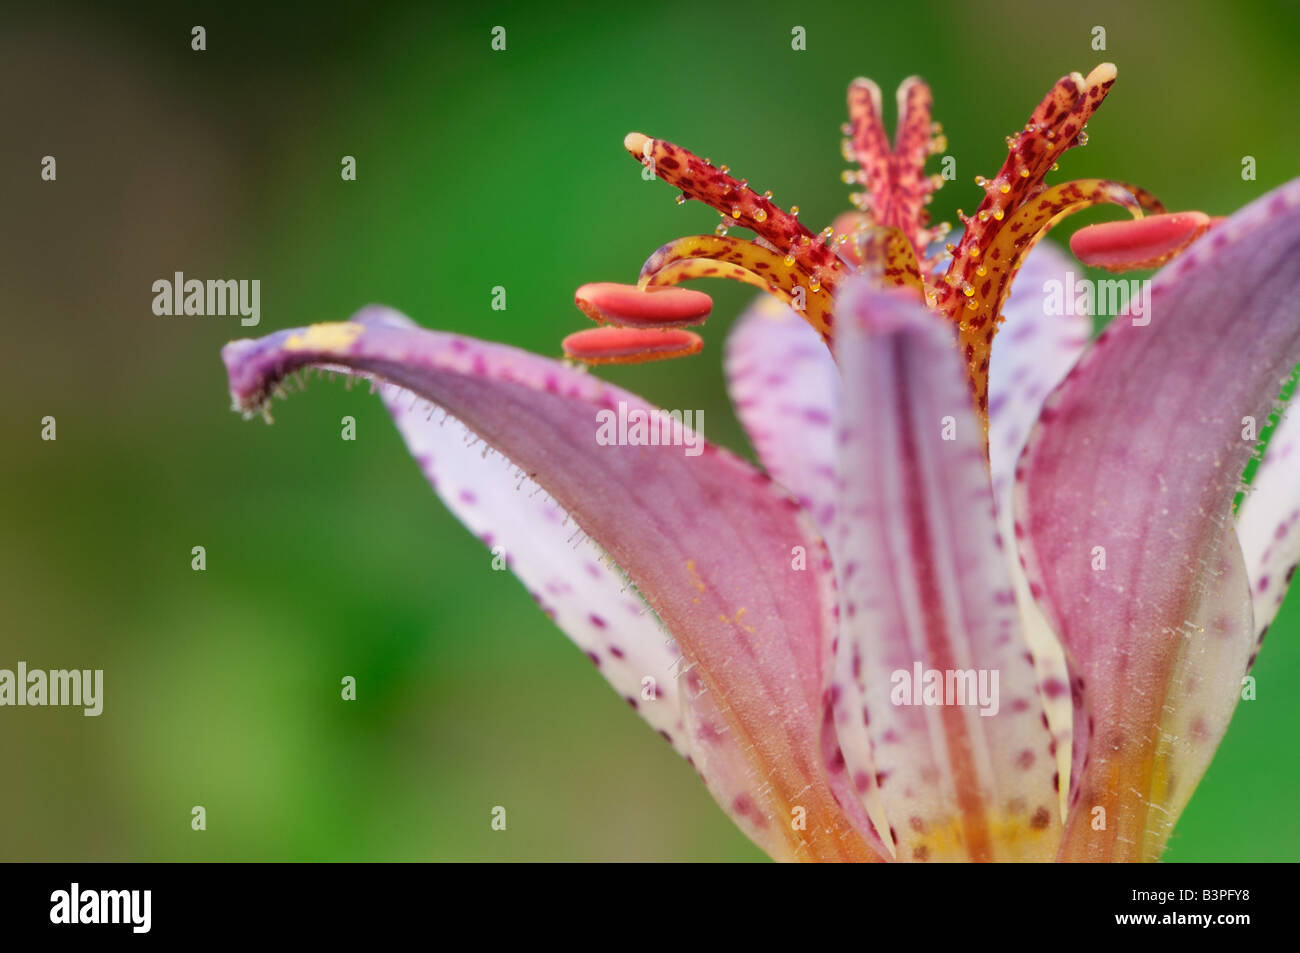 Looking, from the side, at a toad lily (Tricyrtis hirta) which is accented by the beautiful green foliage. Stock Photo